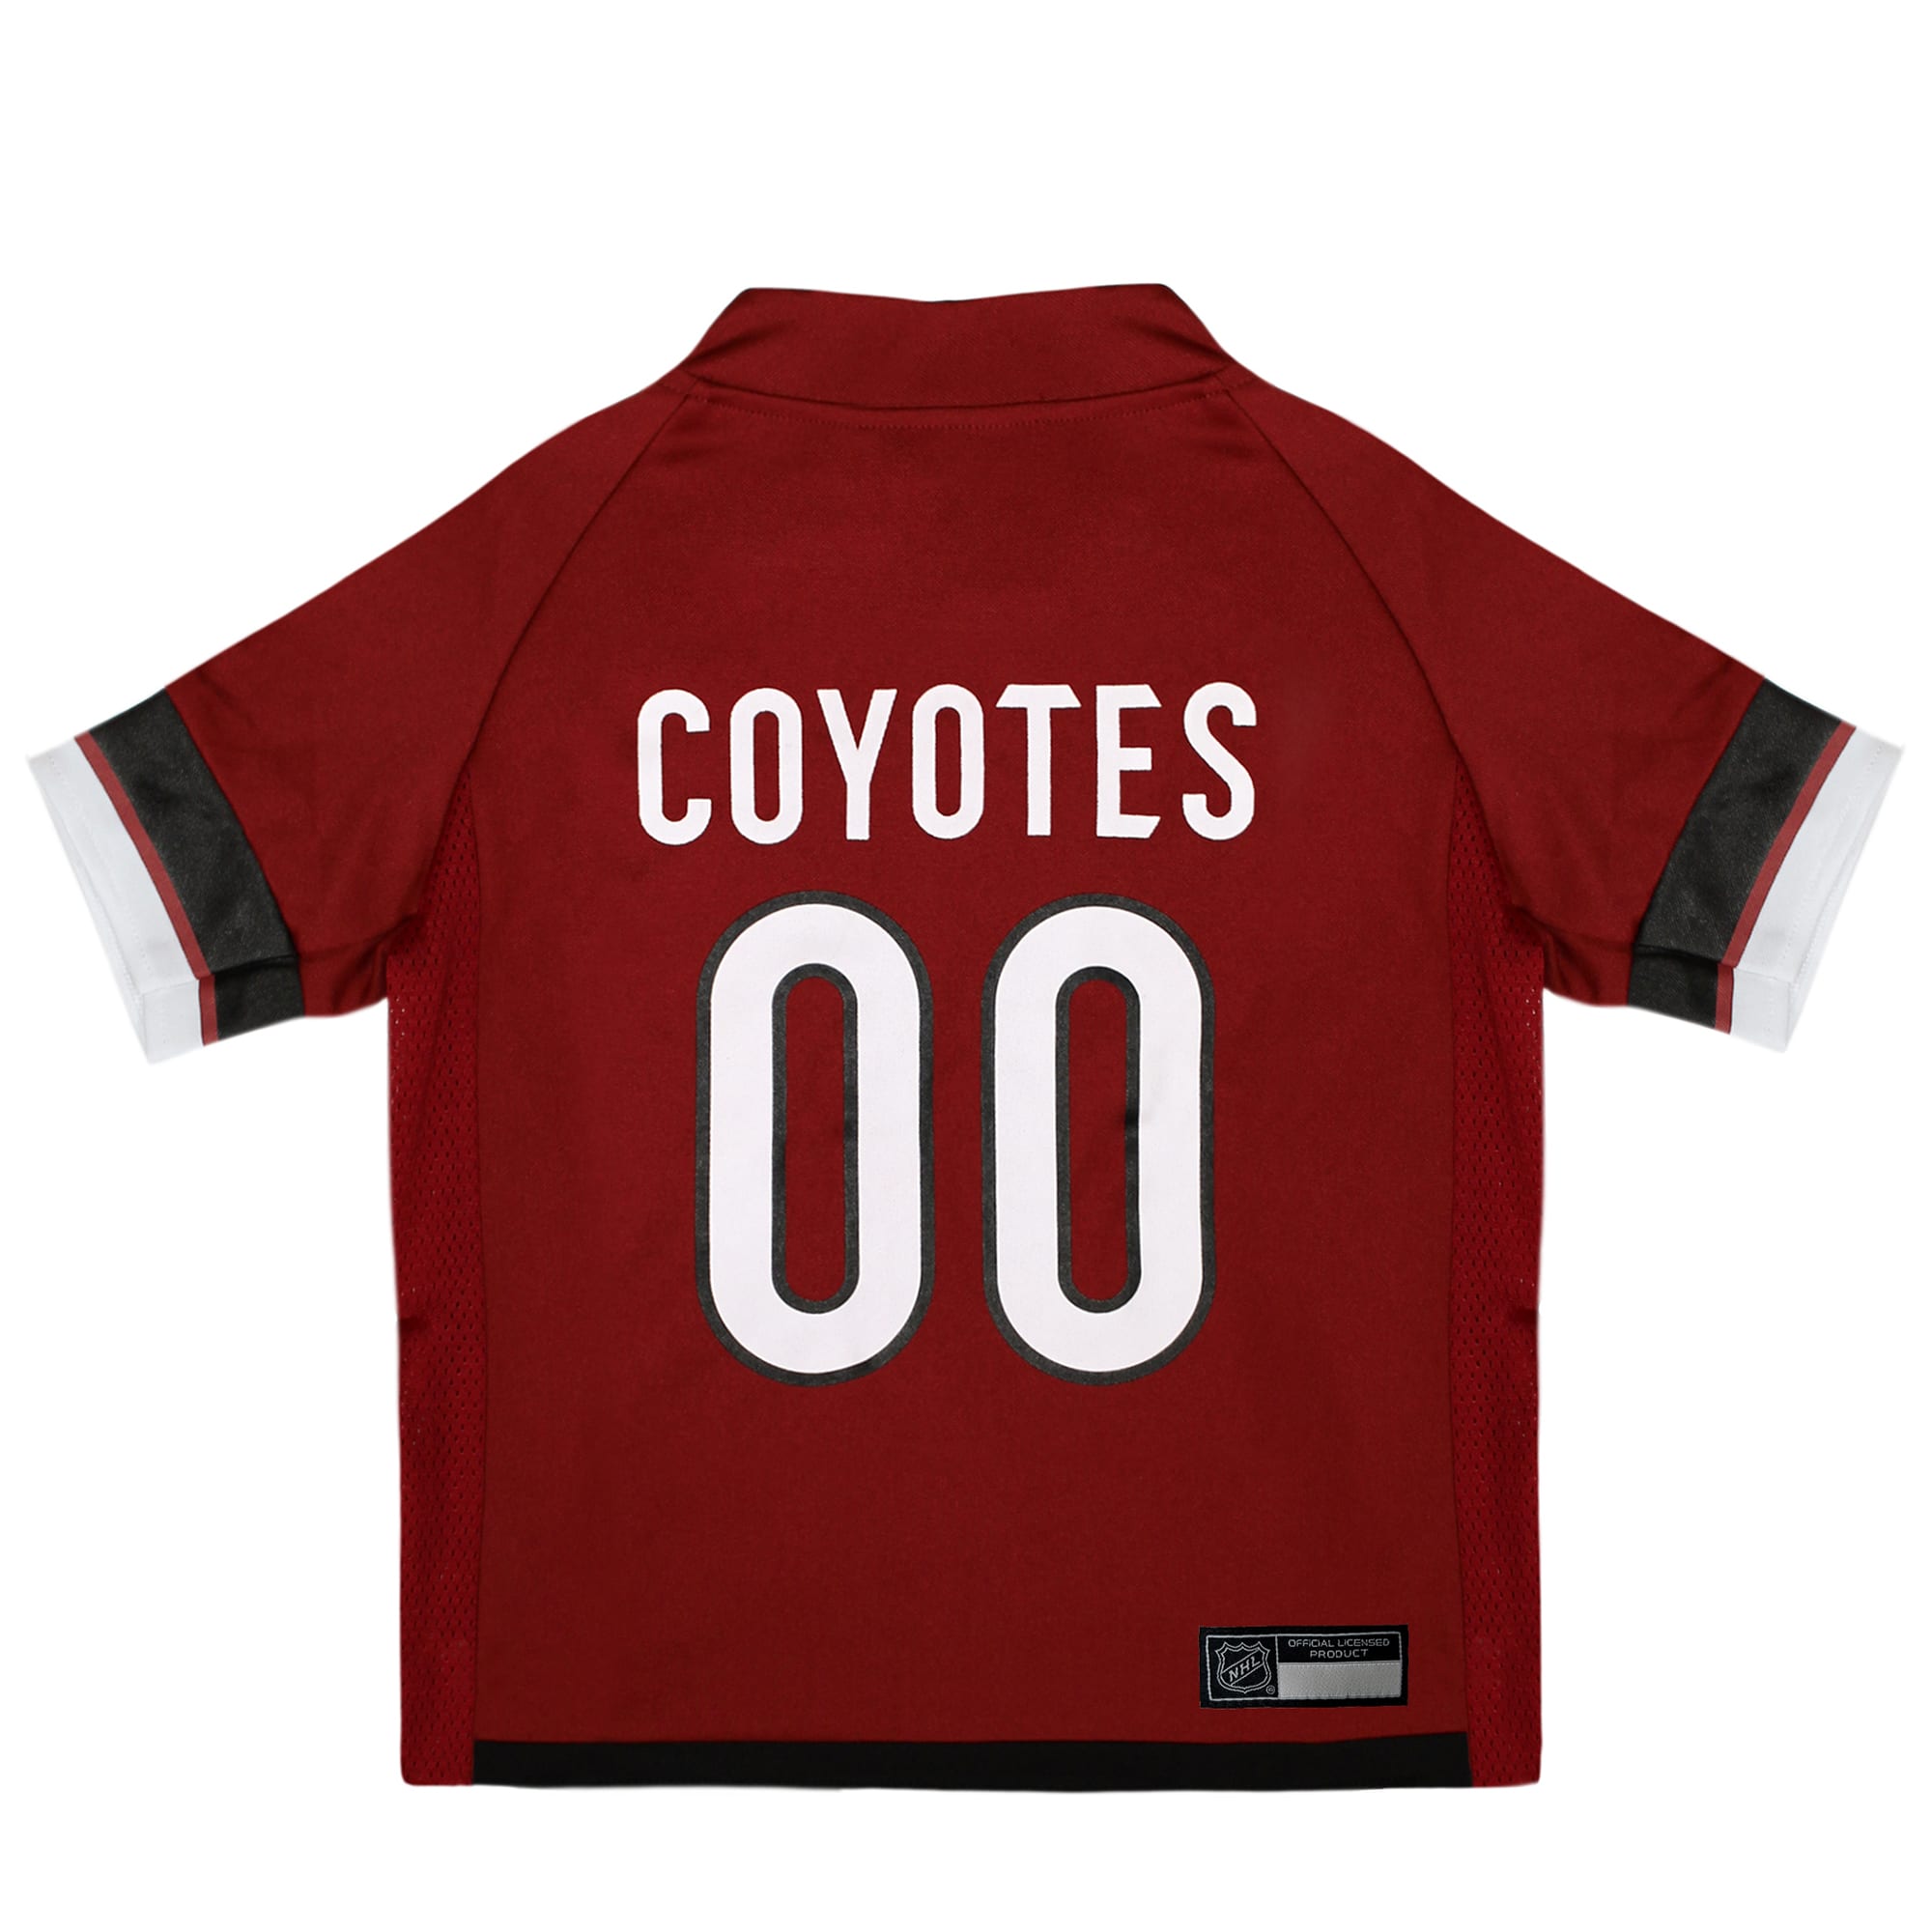 Arizona Coyotes Team Issued Jersey